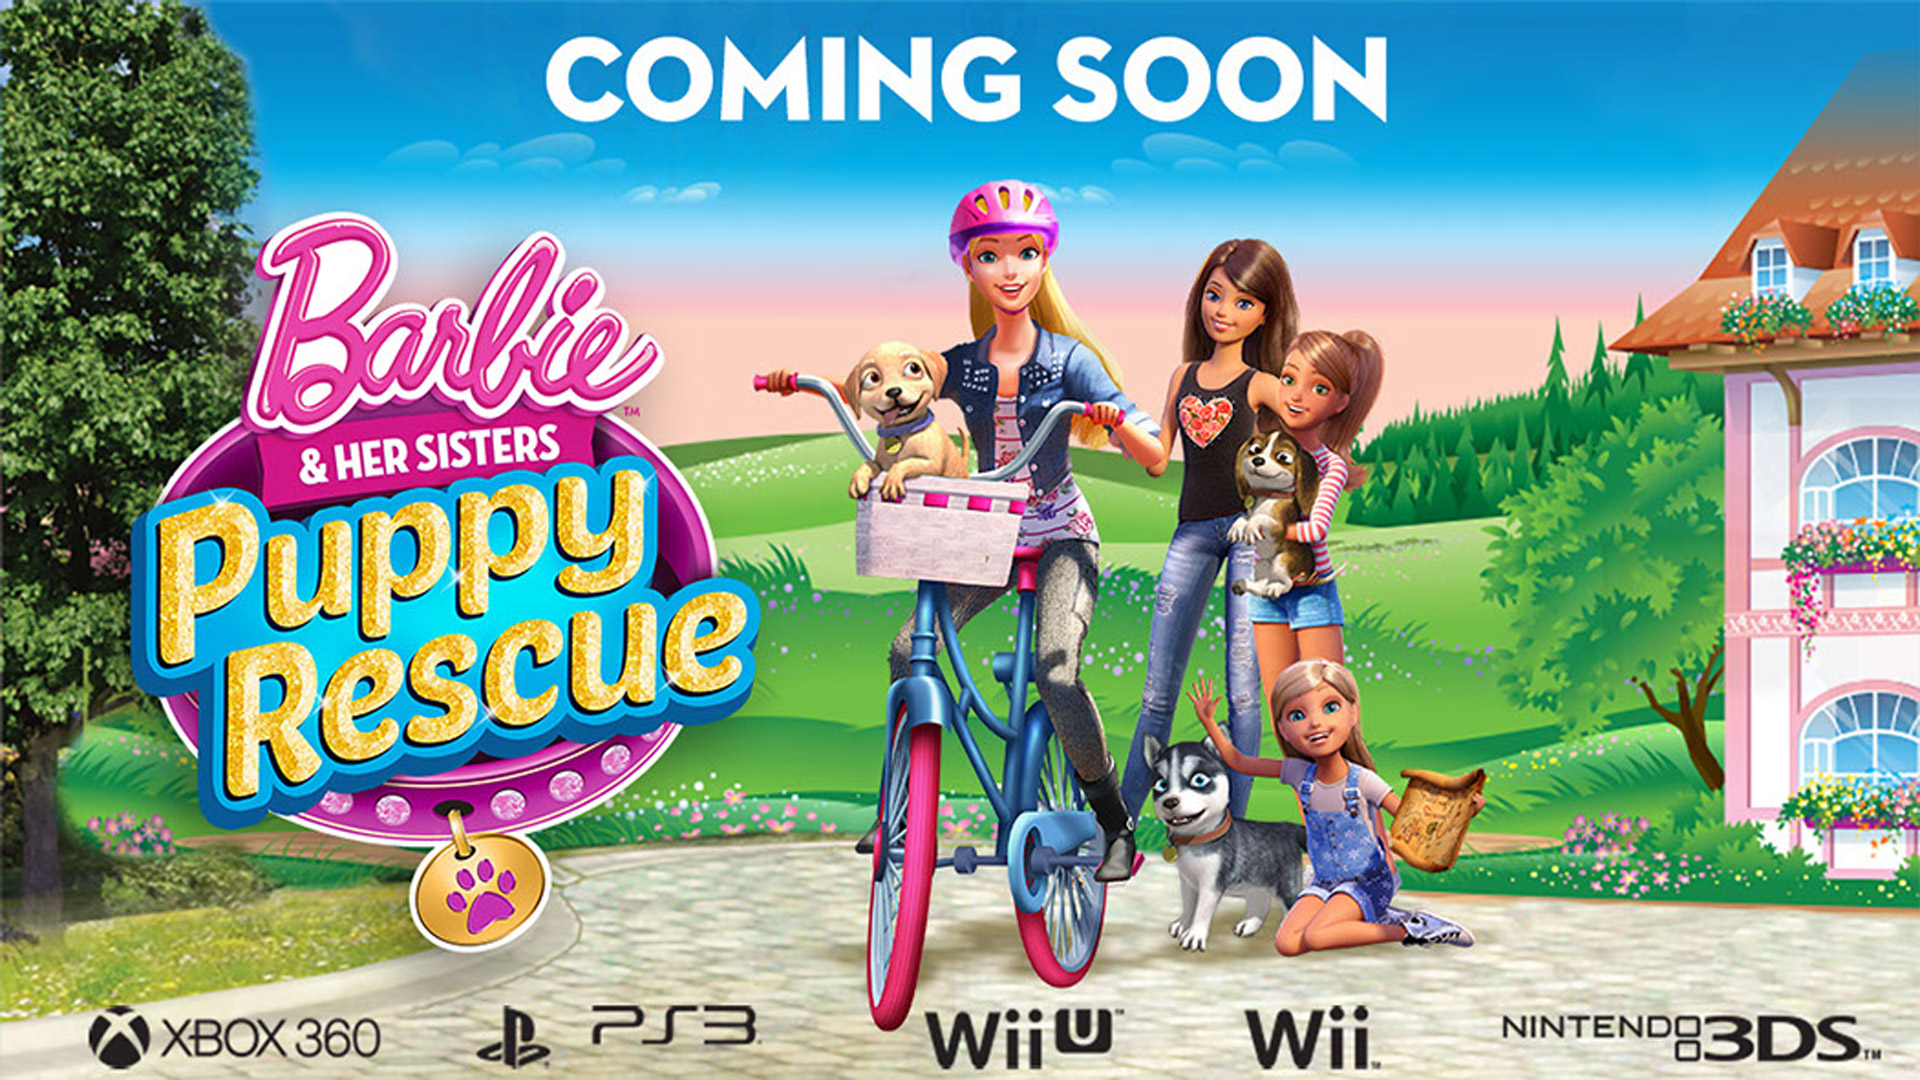 Barbie and Her Sisters Puppy Rescue shown at E3 2015